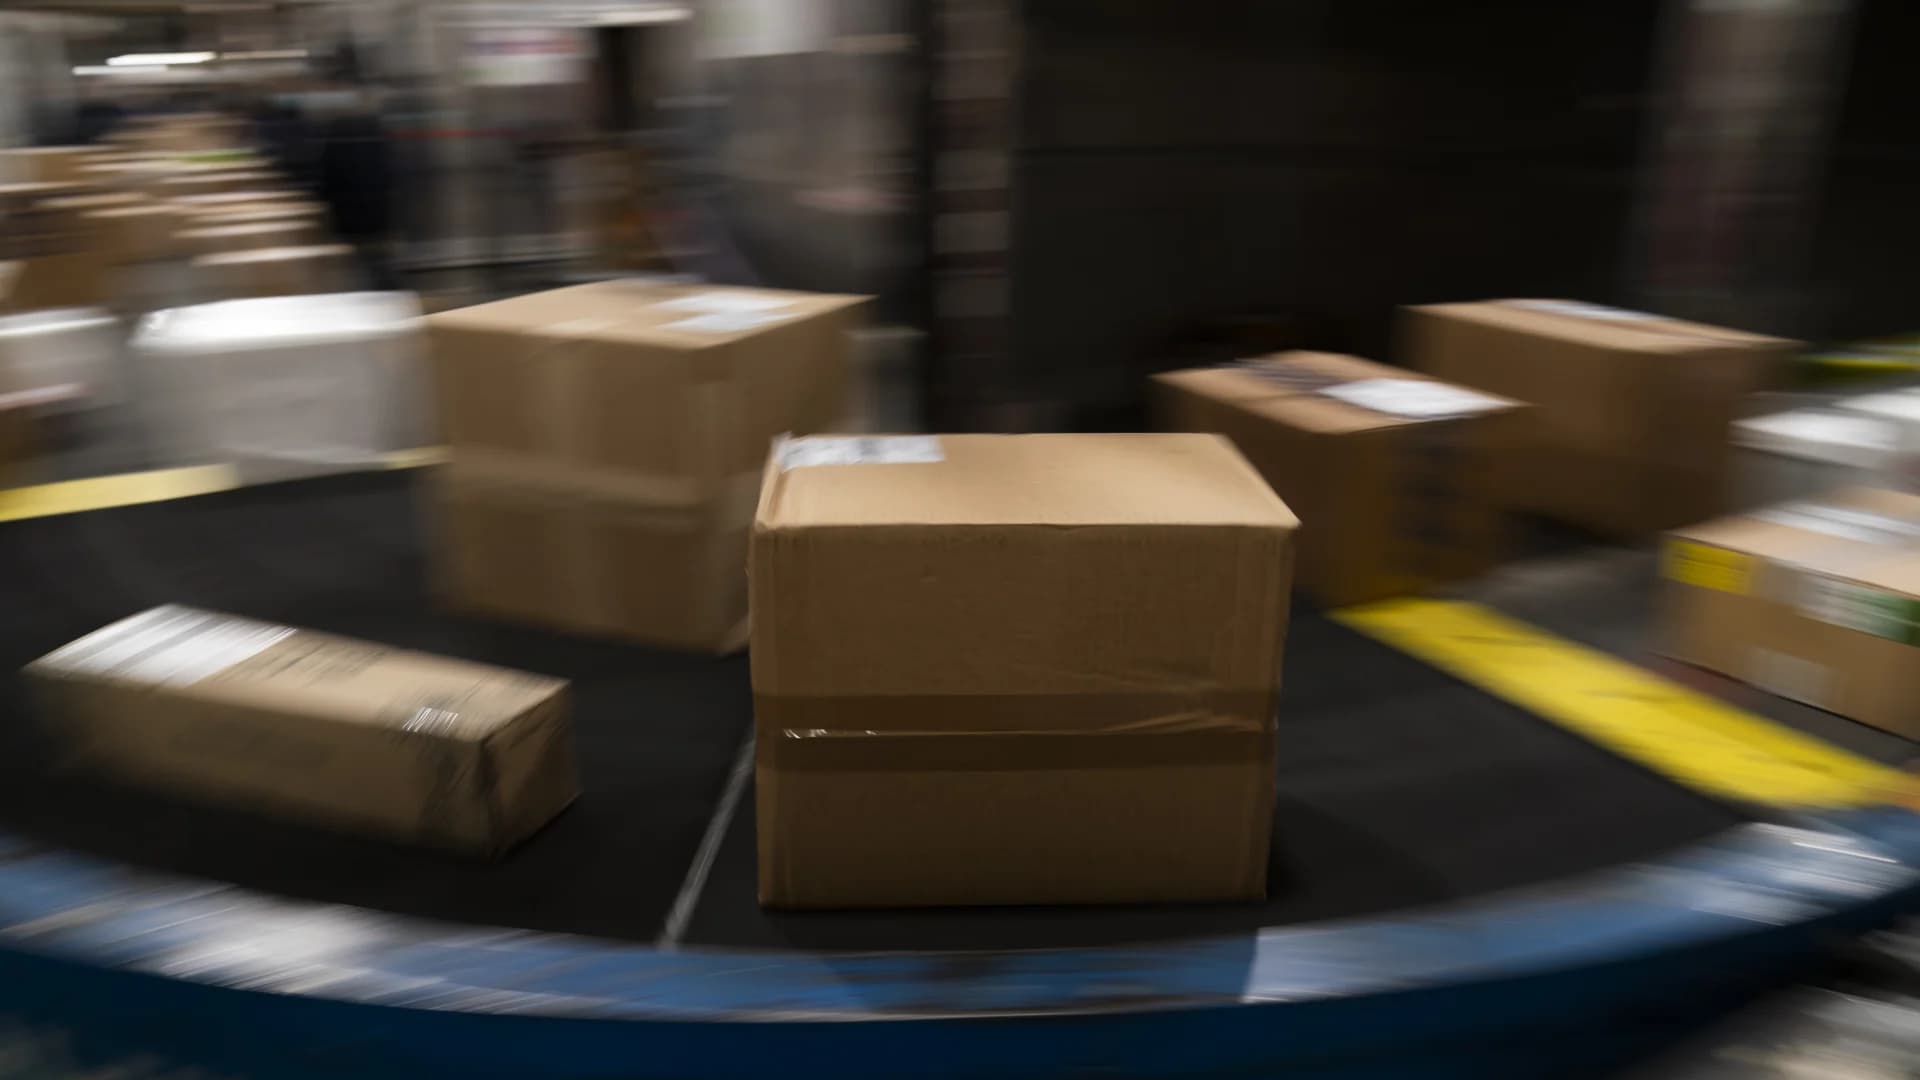 Carriers feeling cheery about on-time holiday deliveries